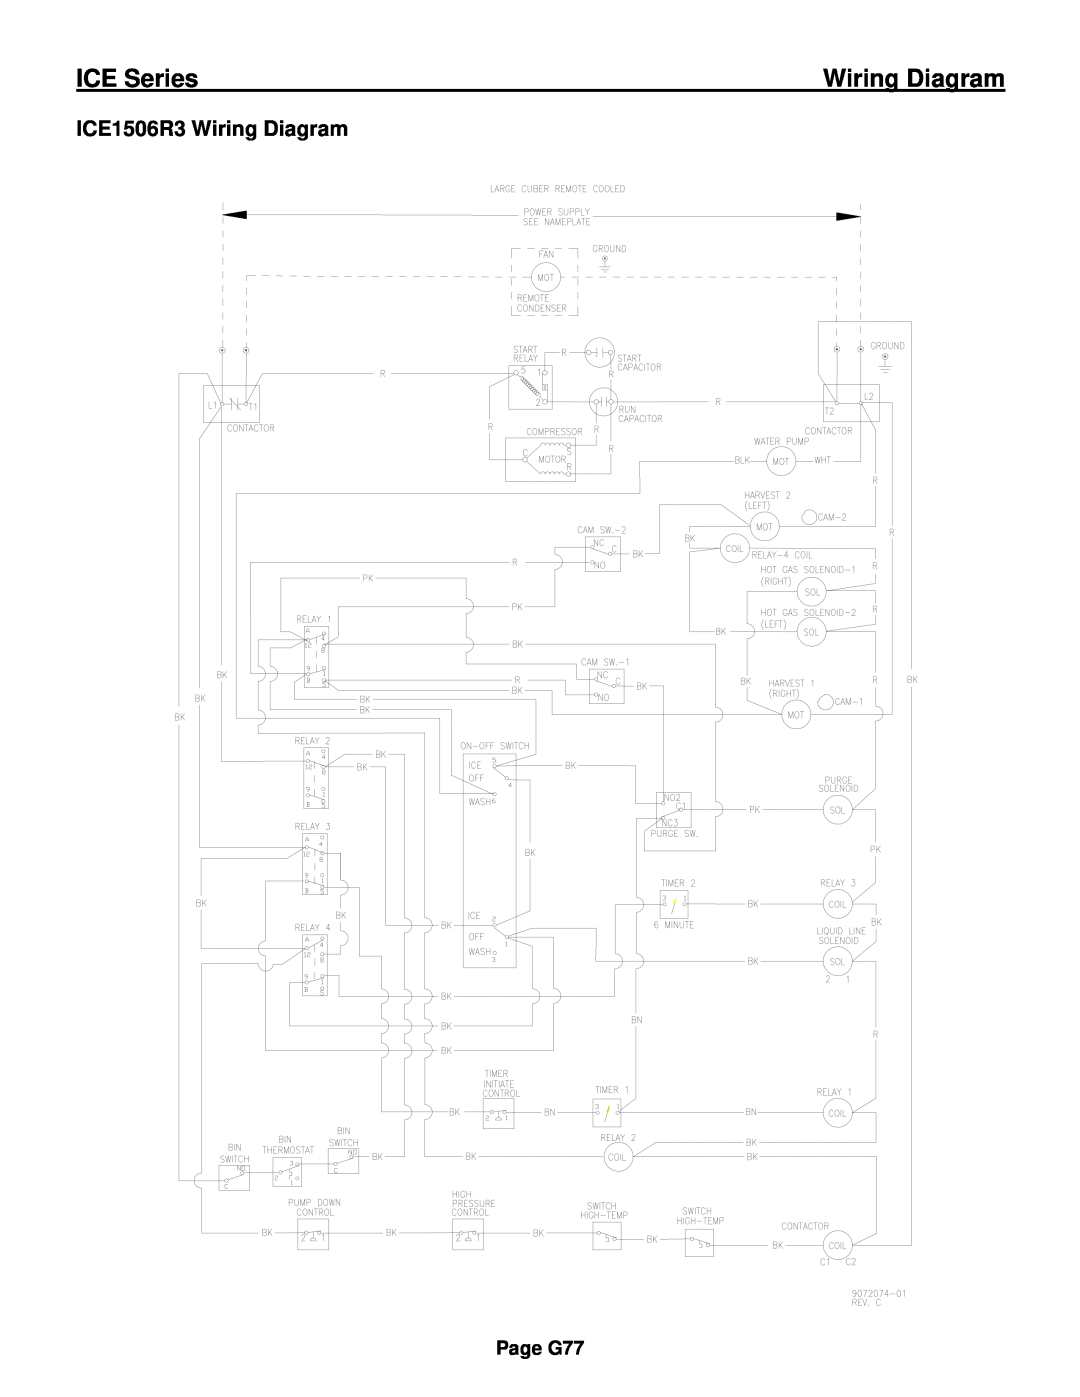 Ice-O-Matic ICE0250 Series installation manual ICE1506R3 Wiring Diagram, ICE Series, Page G77 